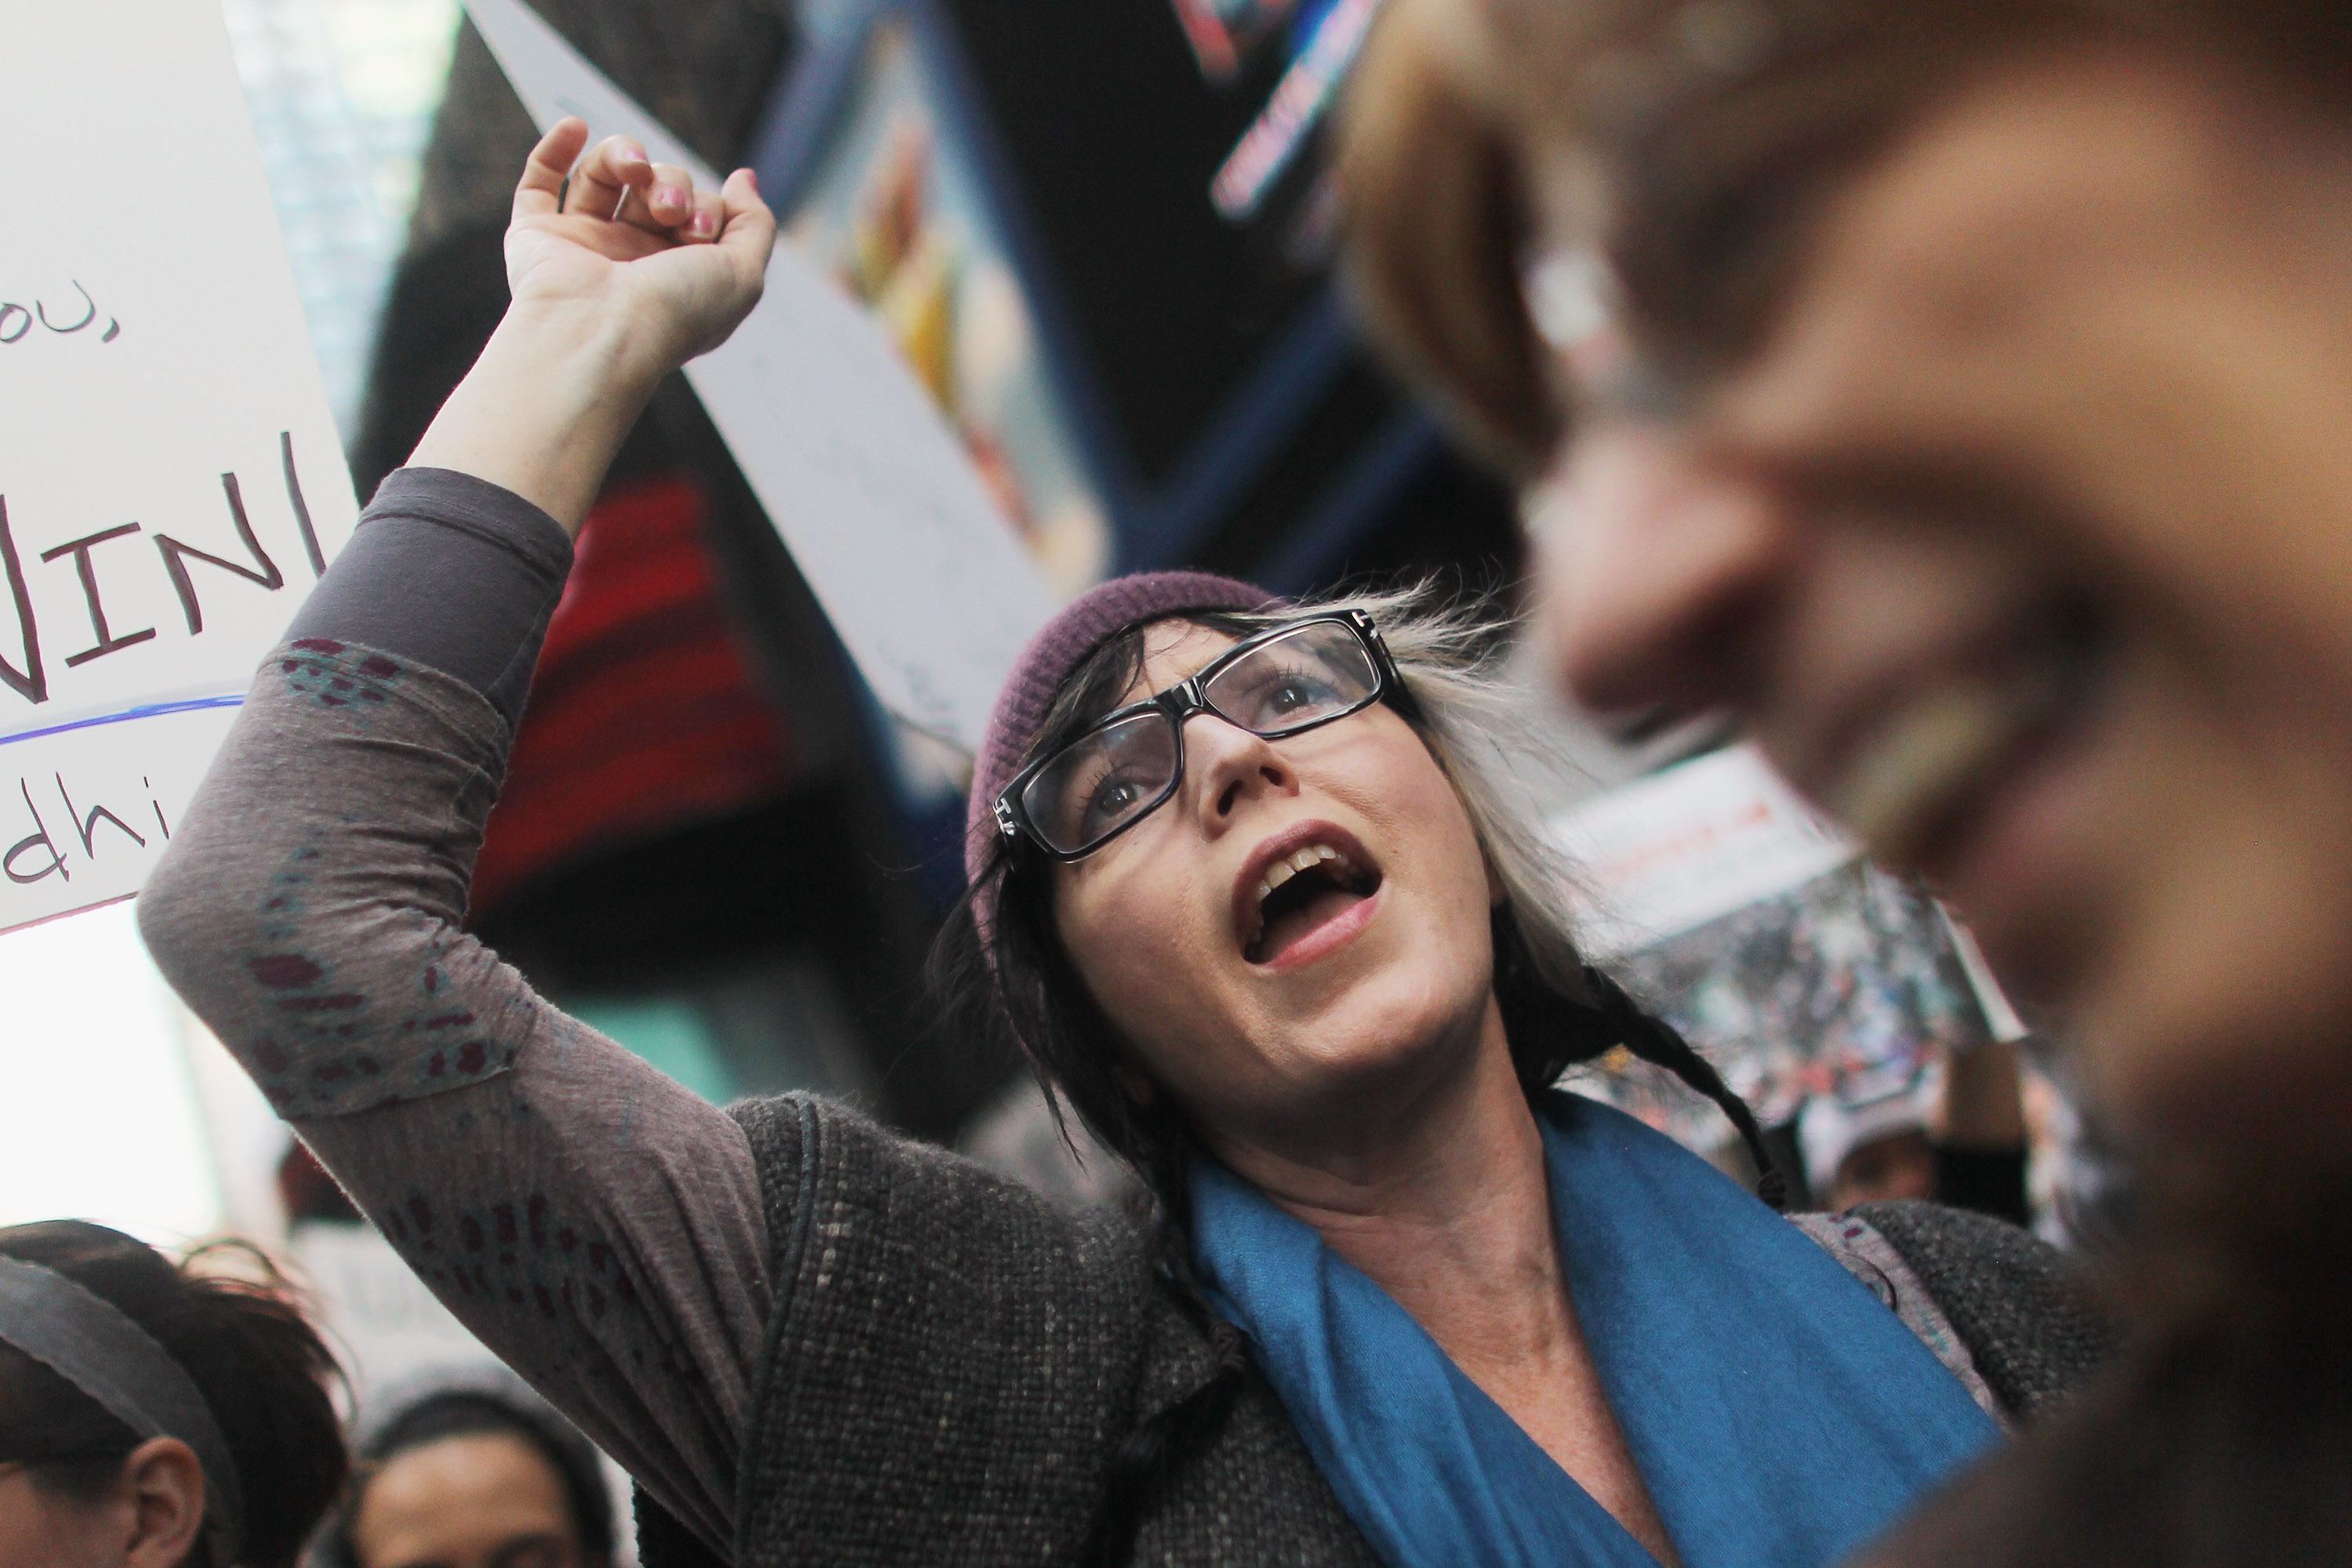 occupy-wall-street-in-times-square-10-15-113.jpg 